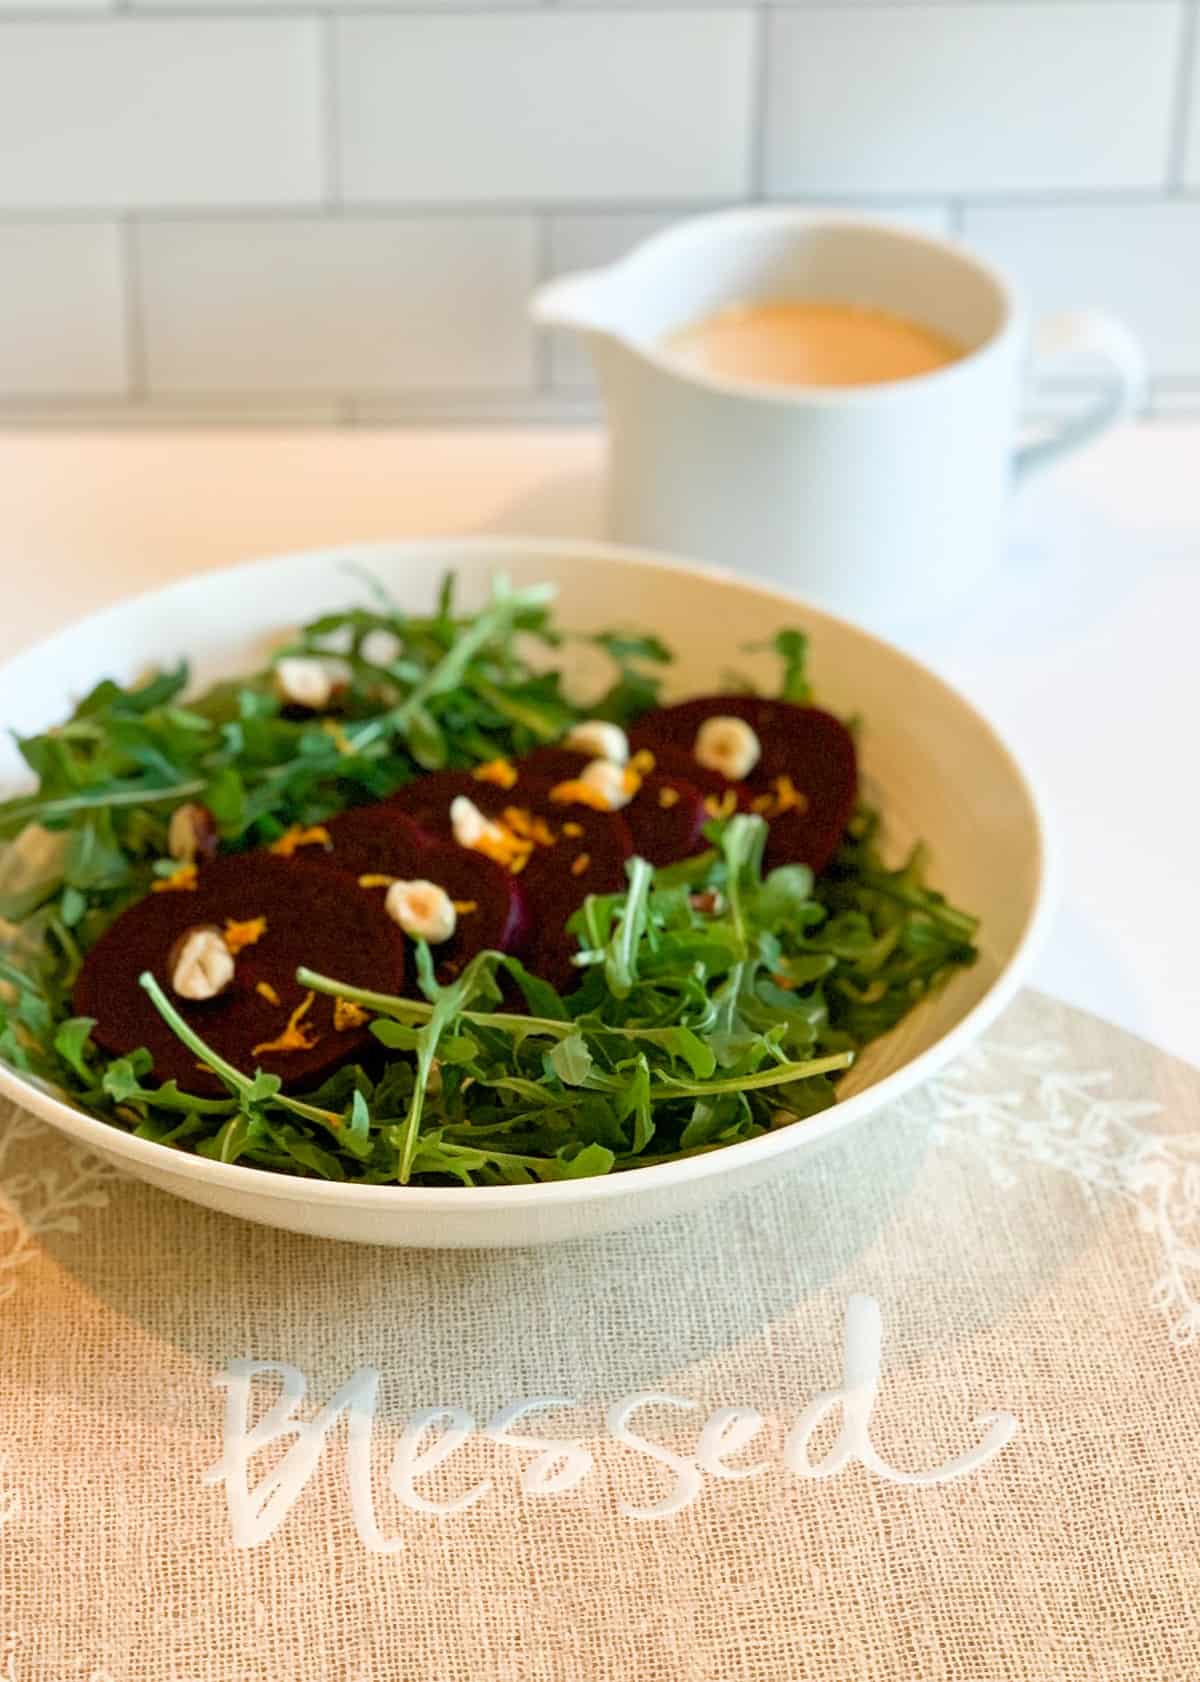 Elegant Beet Arugula Salad in a white bowl sitting on a placemat that reads "Blessed" and a blurred container of orange vinaigrette dressing in the background